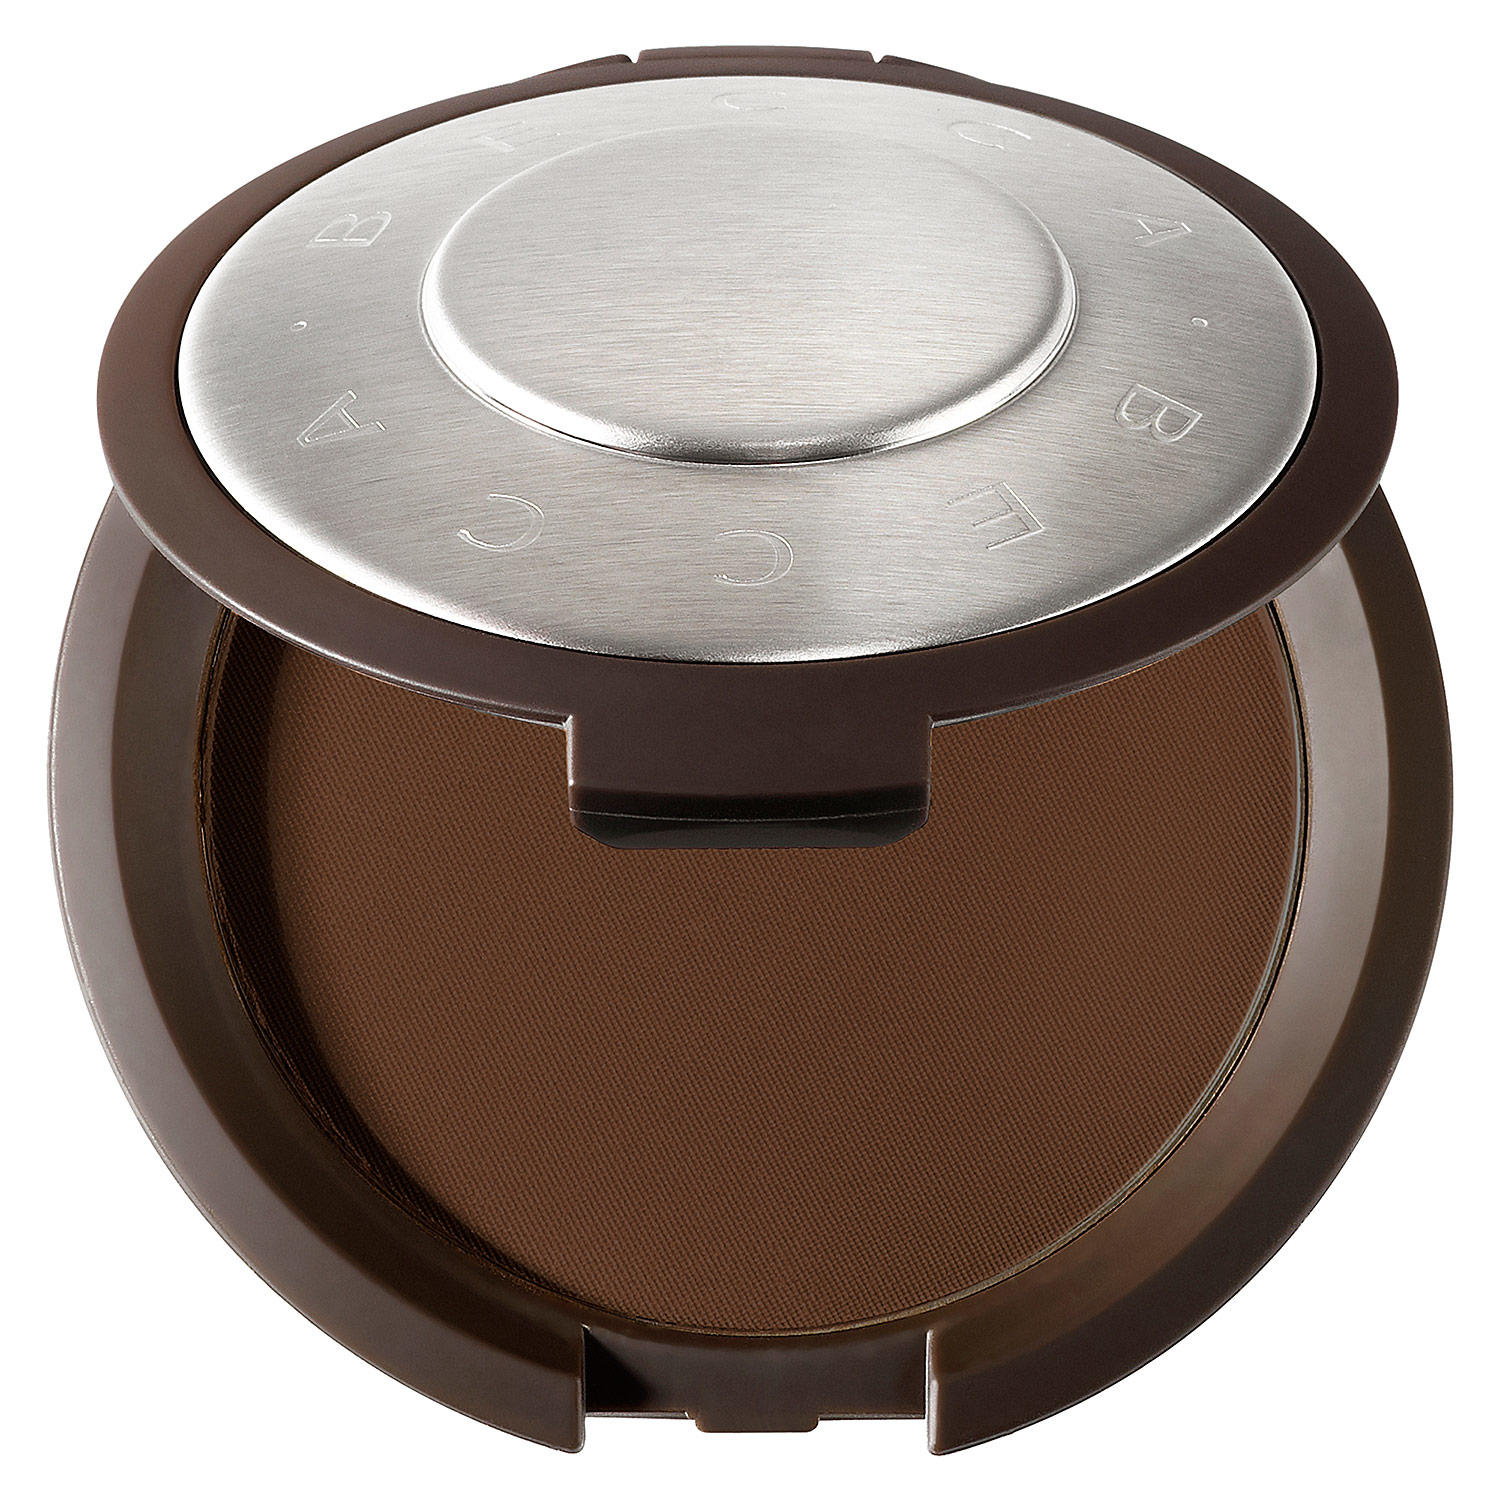 BECCA Perfect Skin Mineral Powder Foundation Cacao